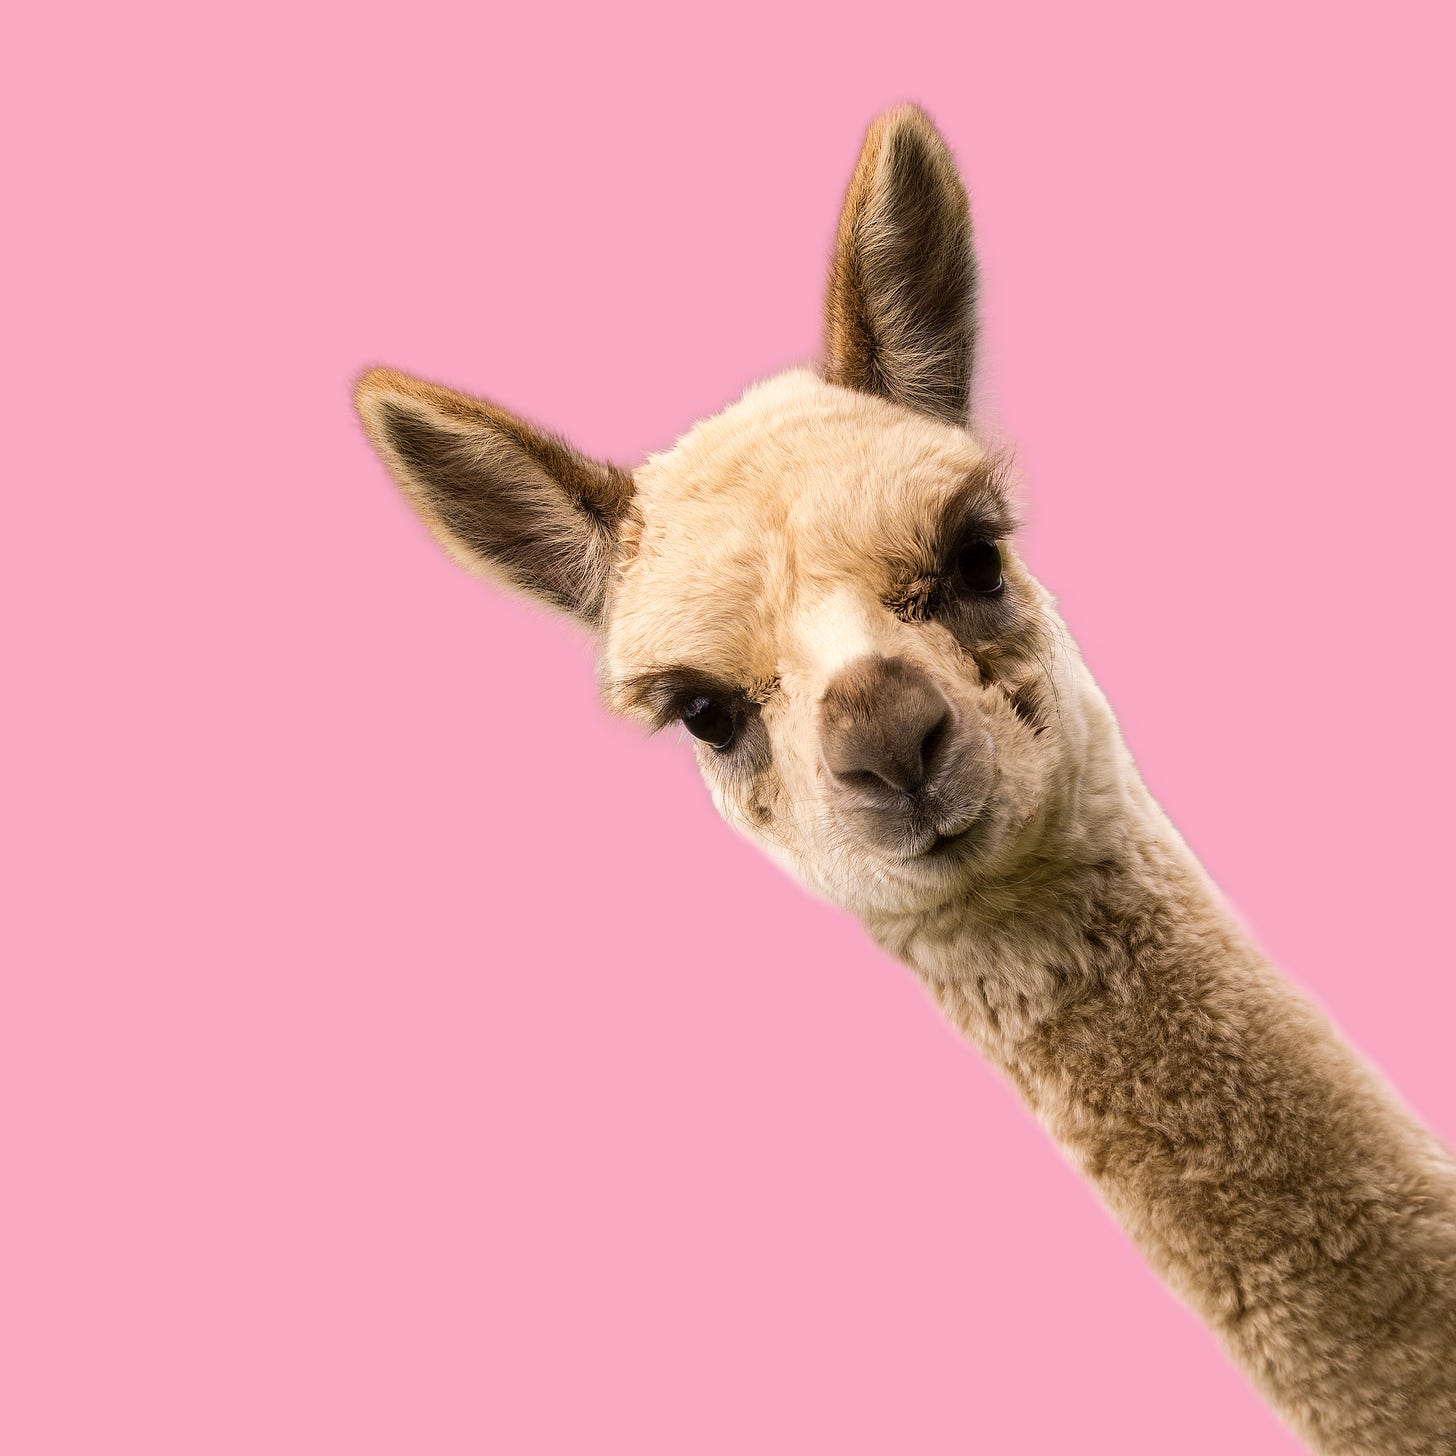 Alpaca from the mid-neck up diagonally on a pink background.